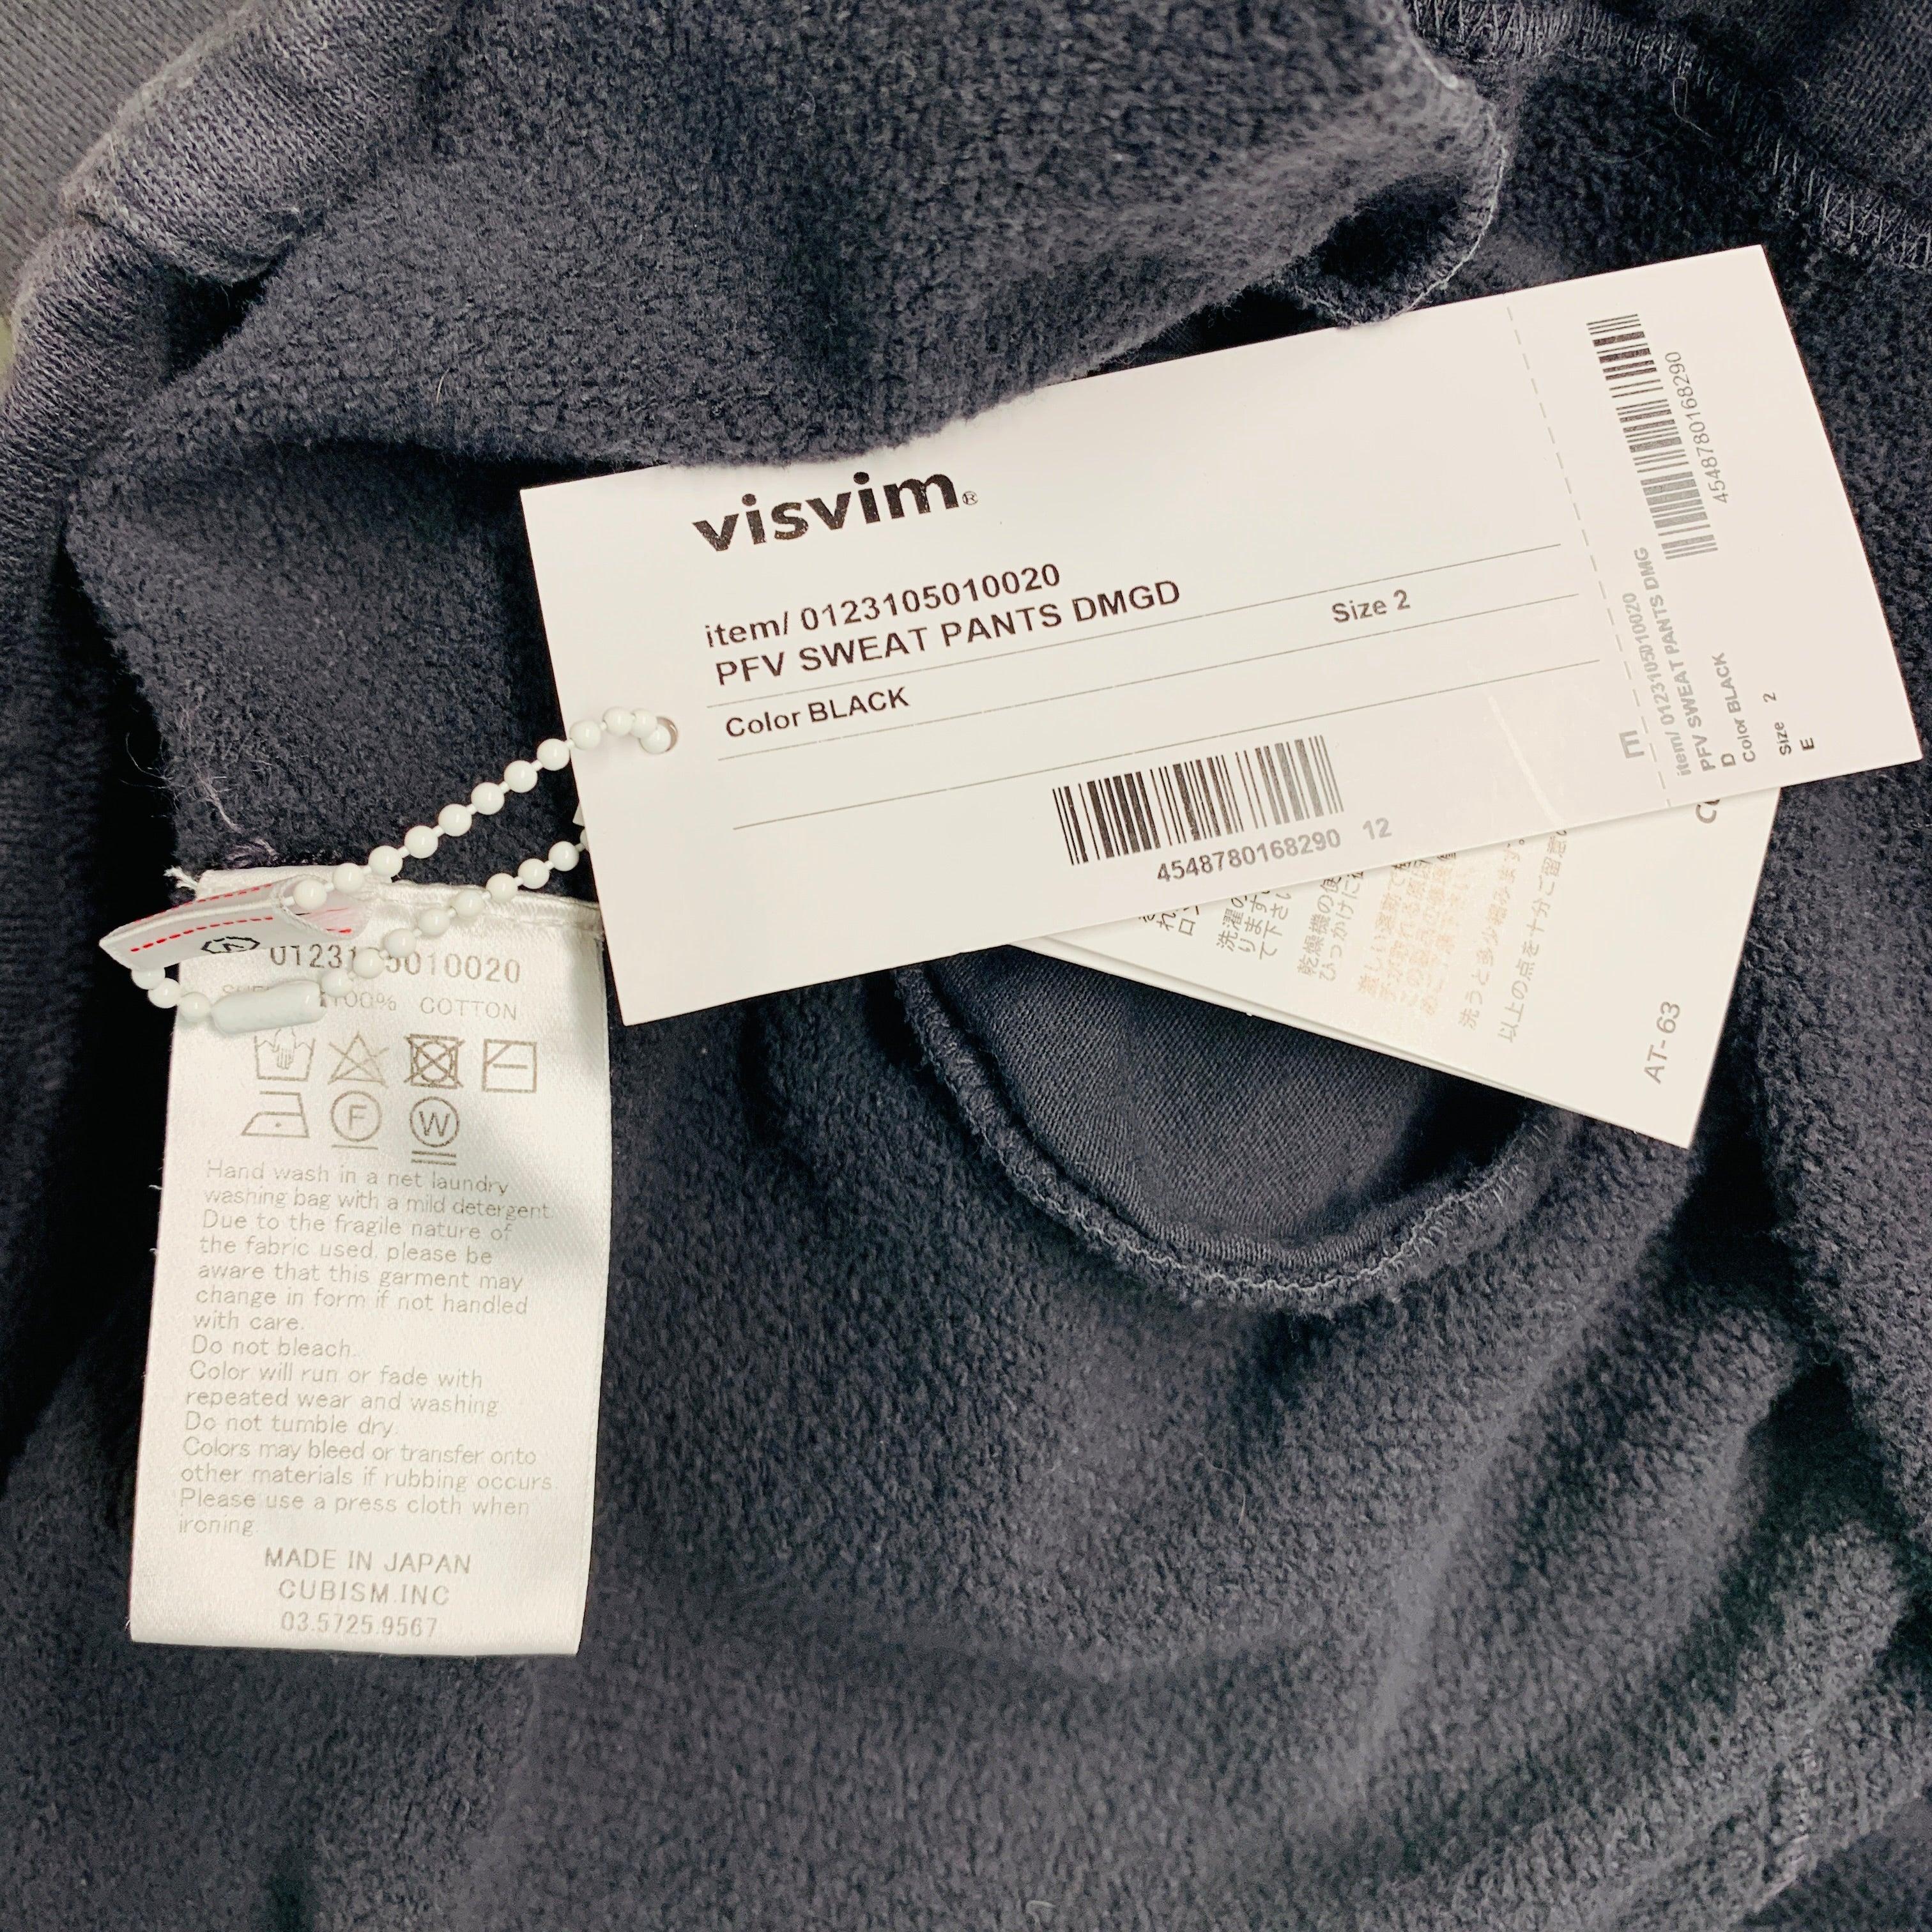 VISVIM -Sweat Pants DMGD- Size S Black Wash Cotton Drawstring Casual Pants In Good Condition For Sale In San Francisco, CA